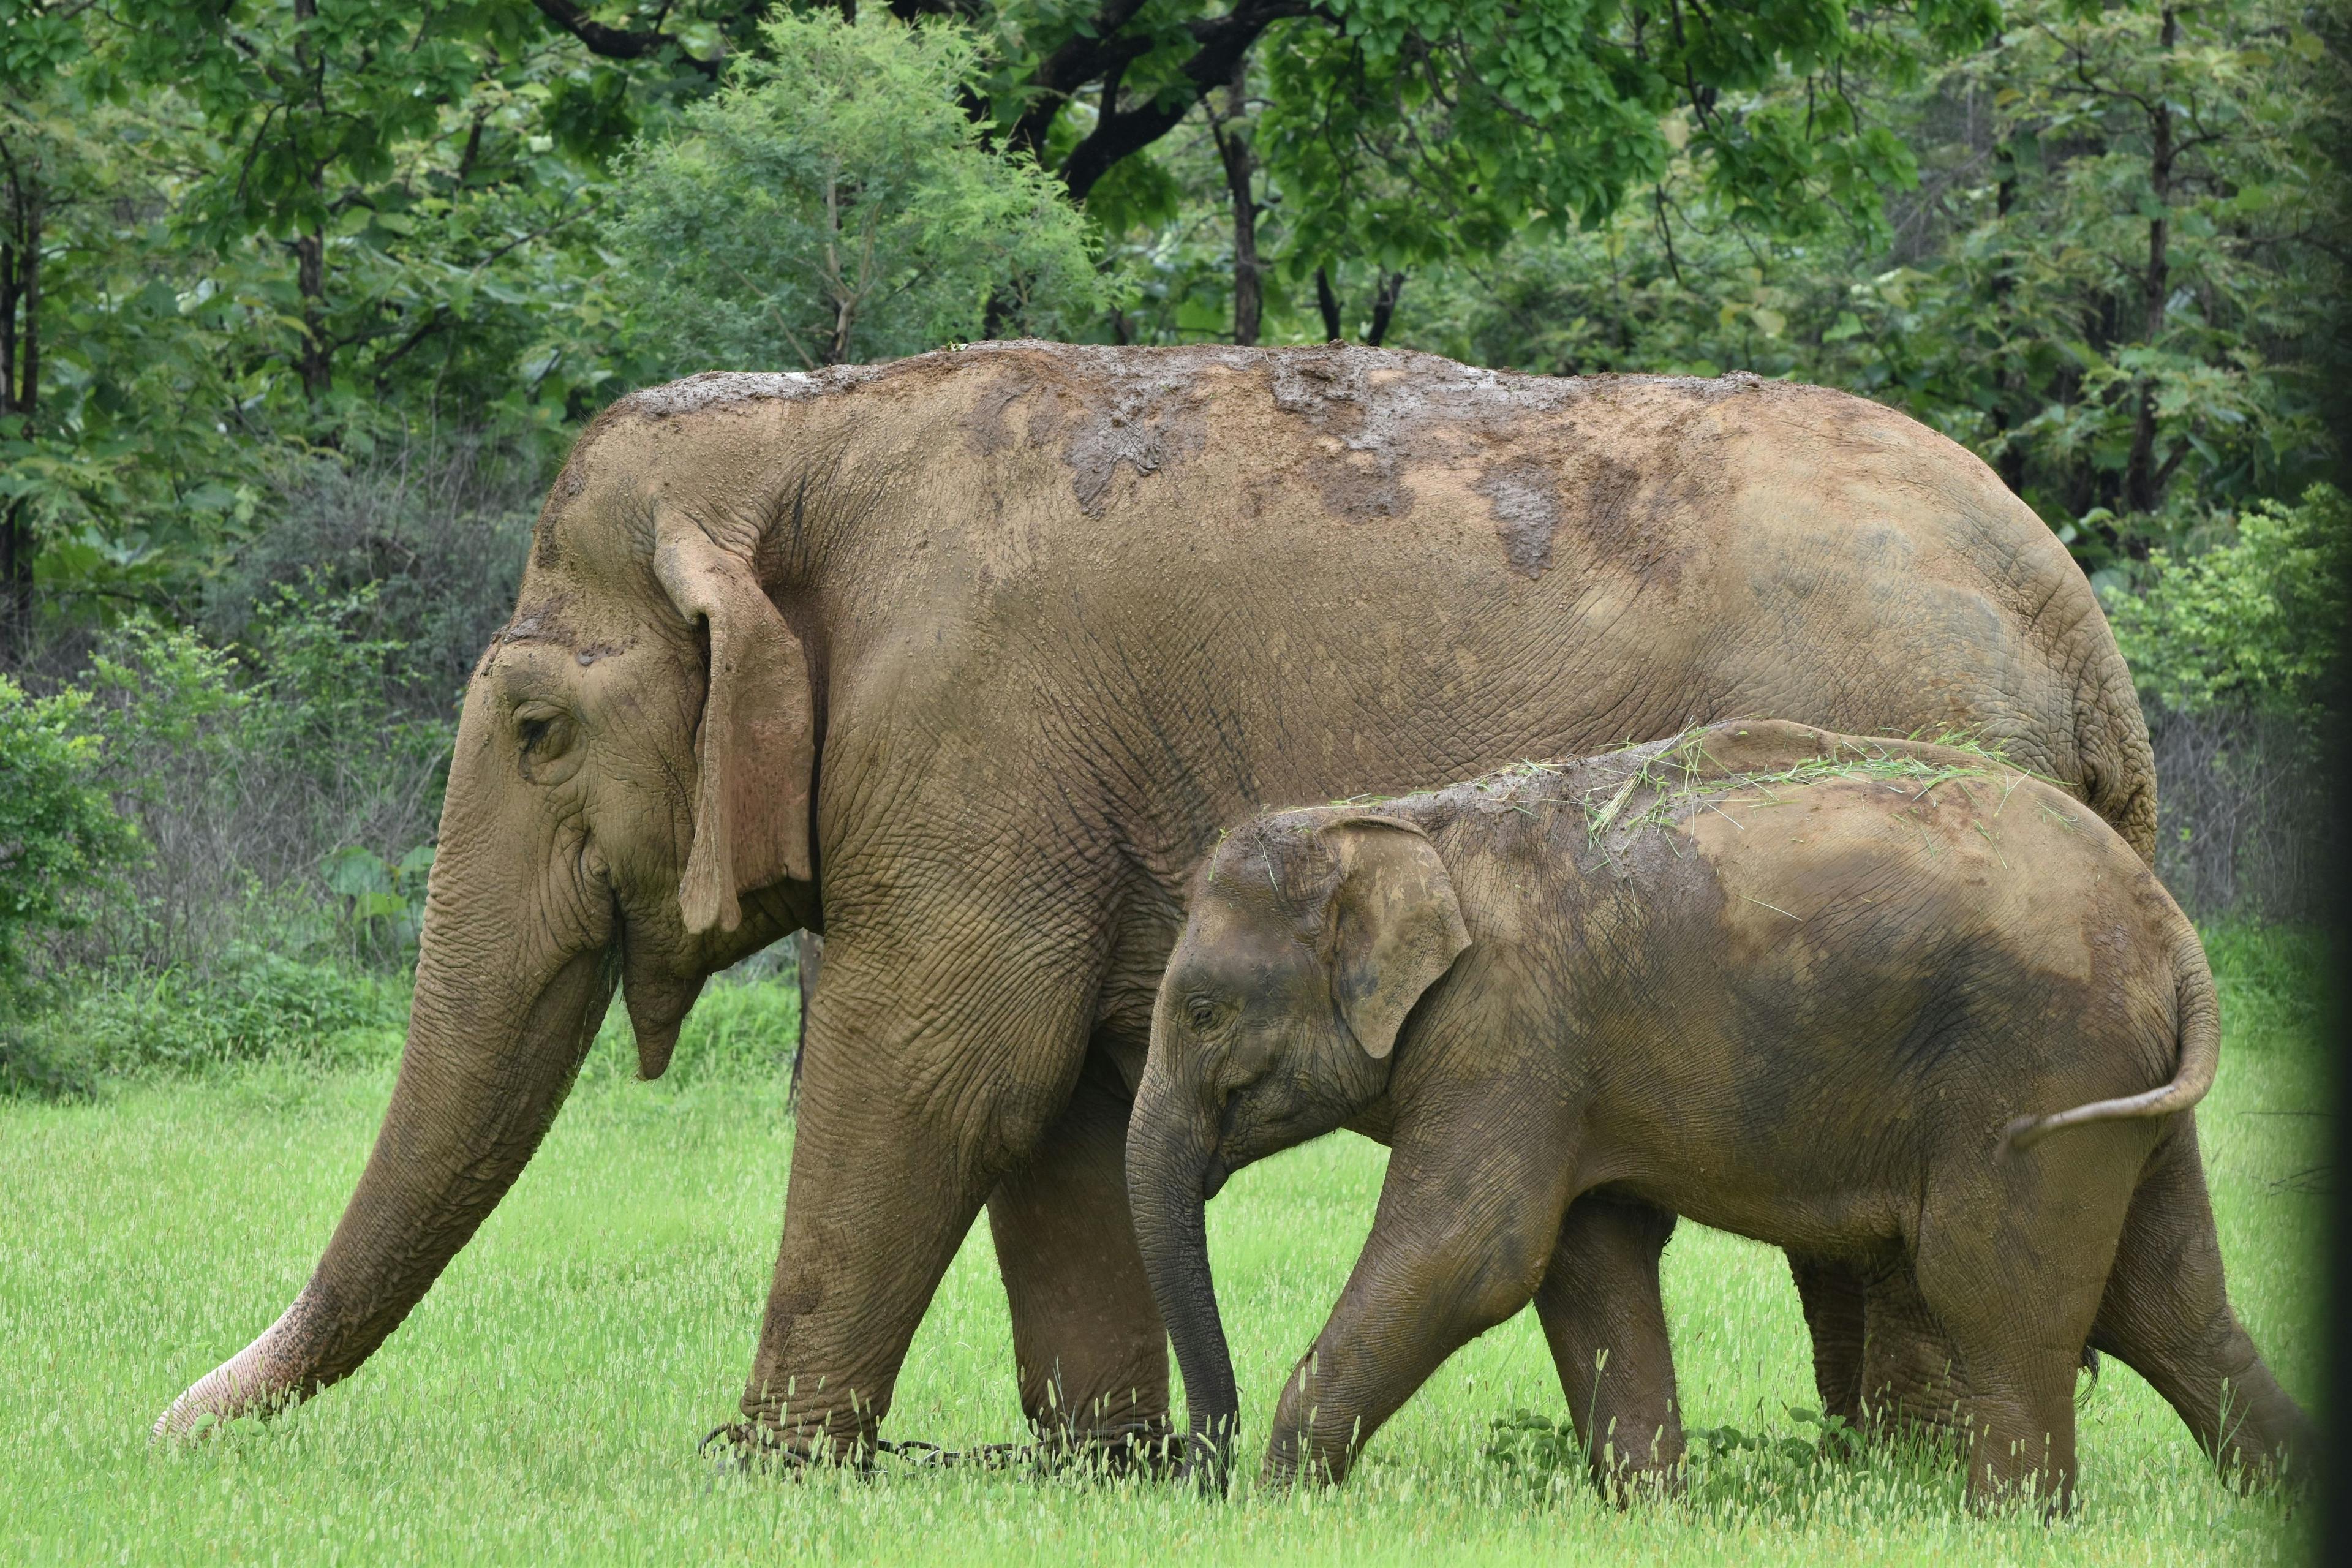 Trial for birth control vaccine for Asian elephants is announced